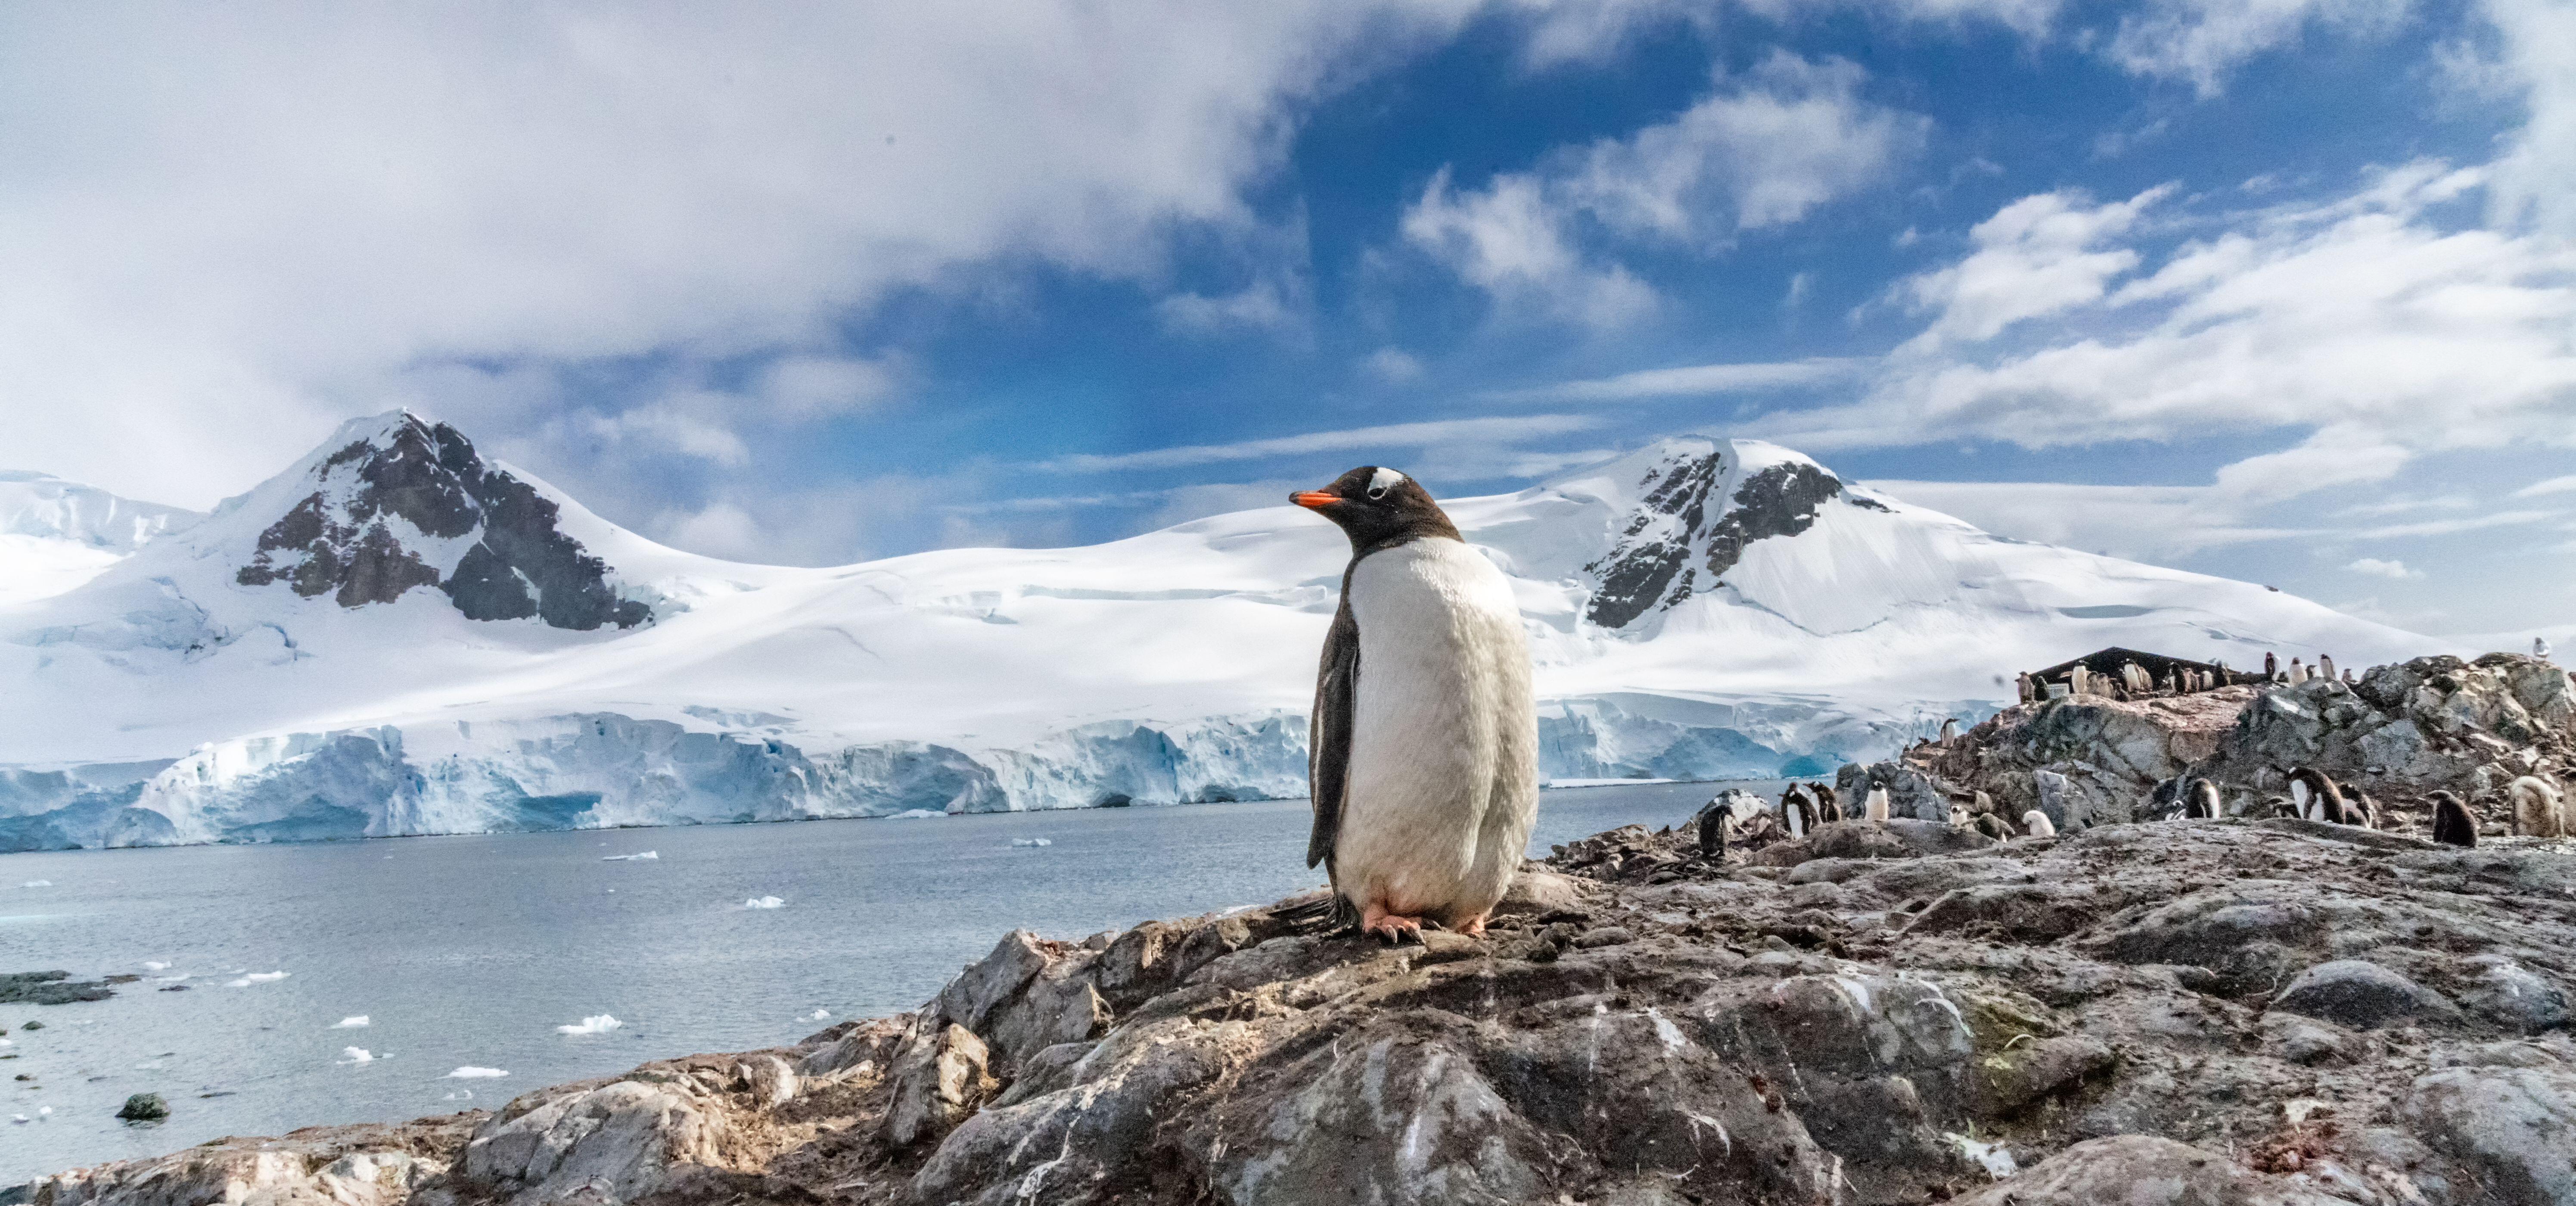 Make friends with the penguins on a breathtaking cruise to the Antarctic